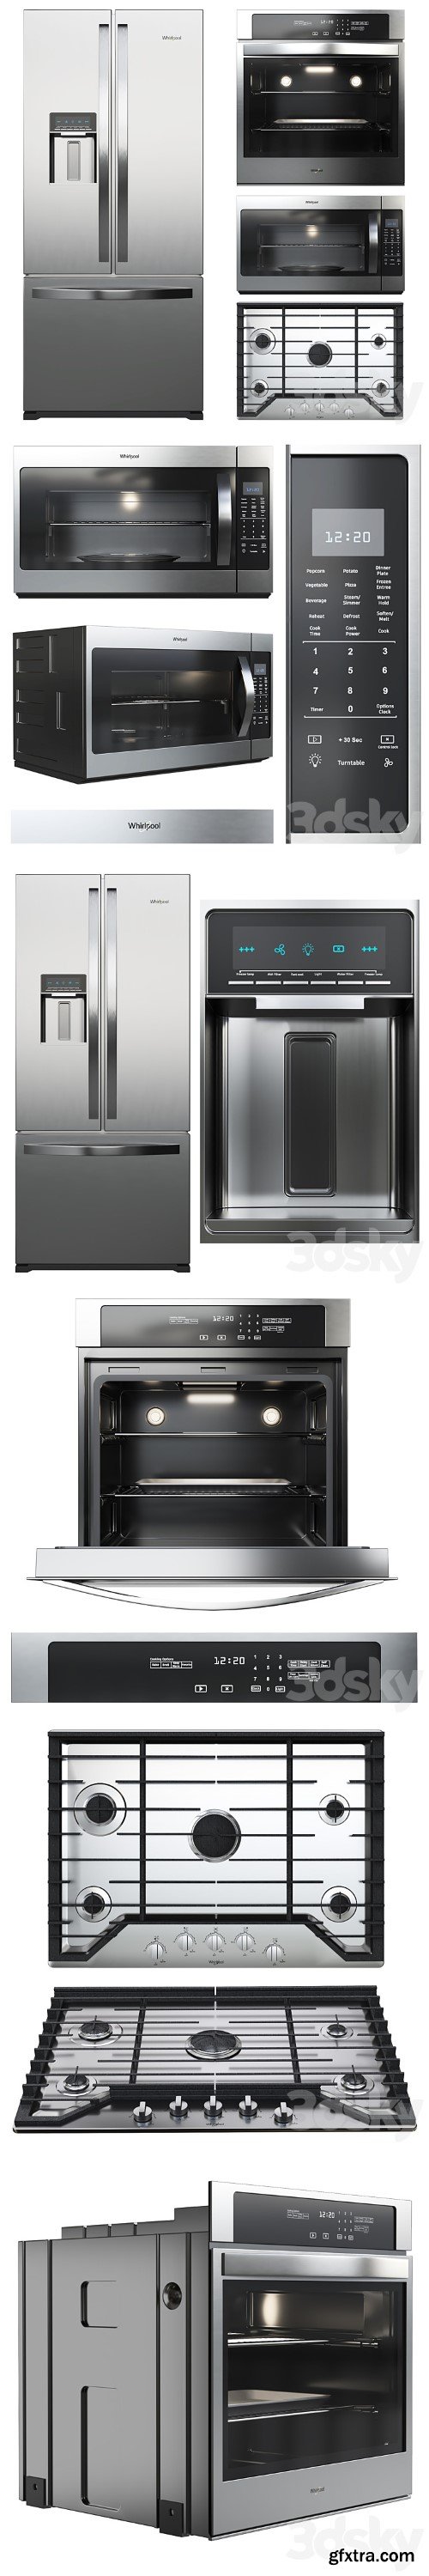 Whirlpool kitchen appliances collection